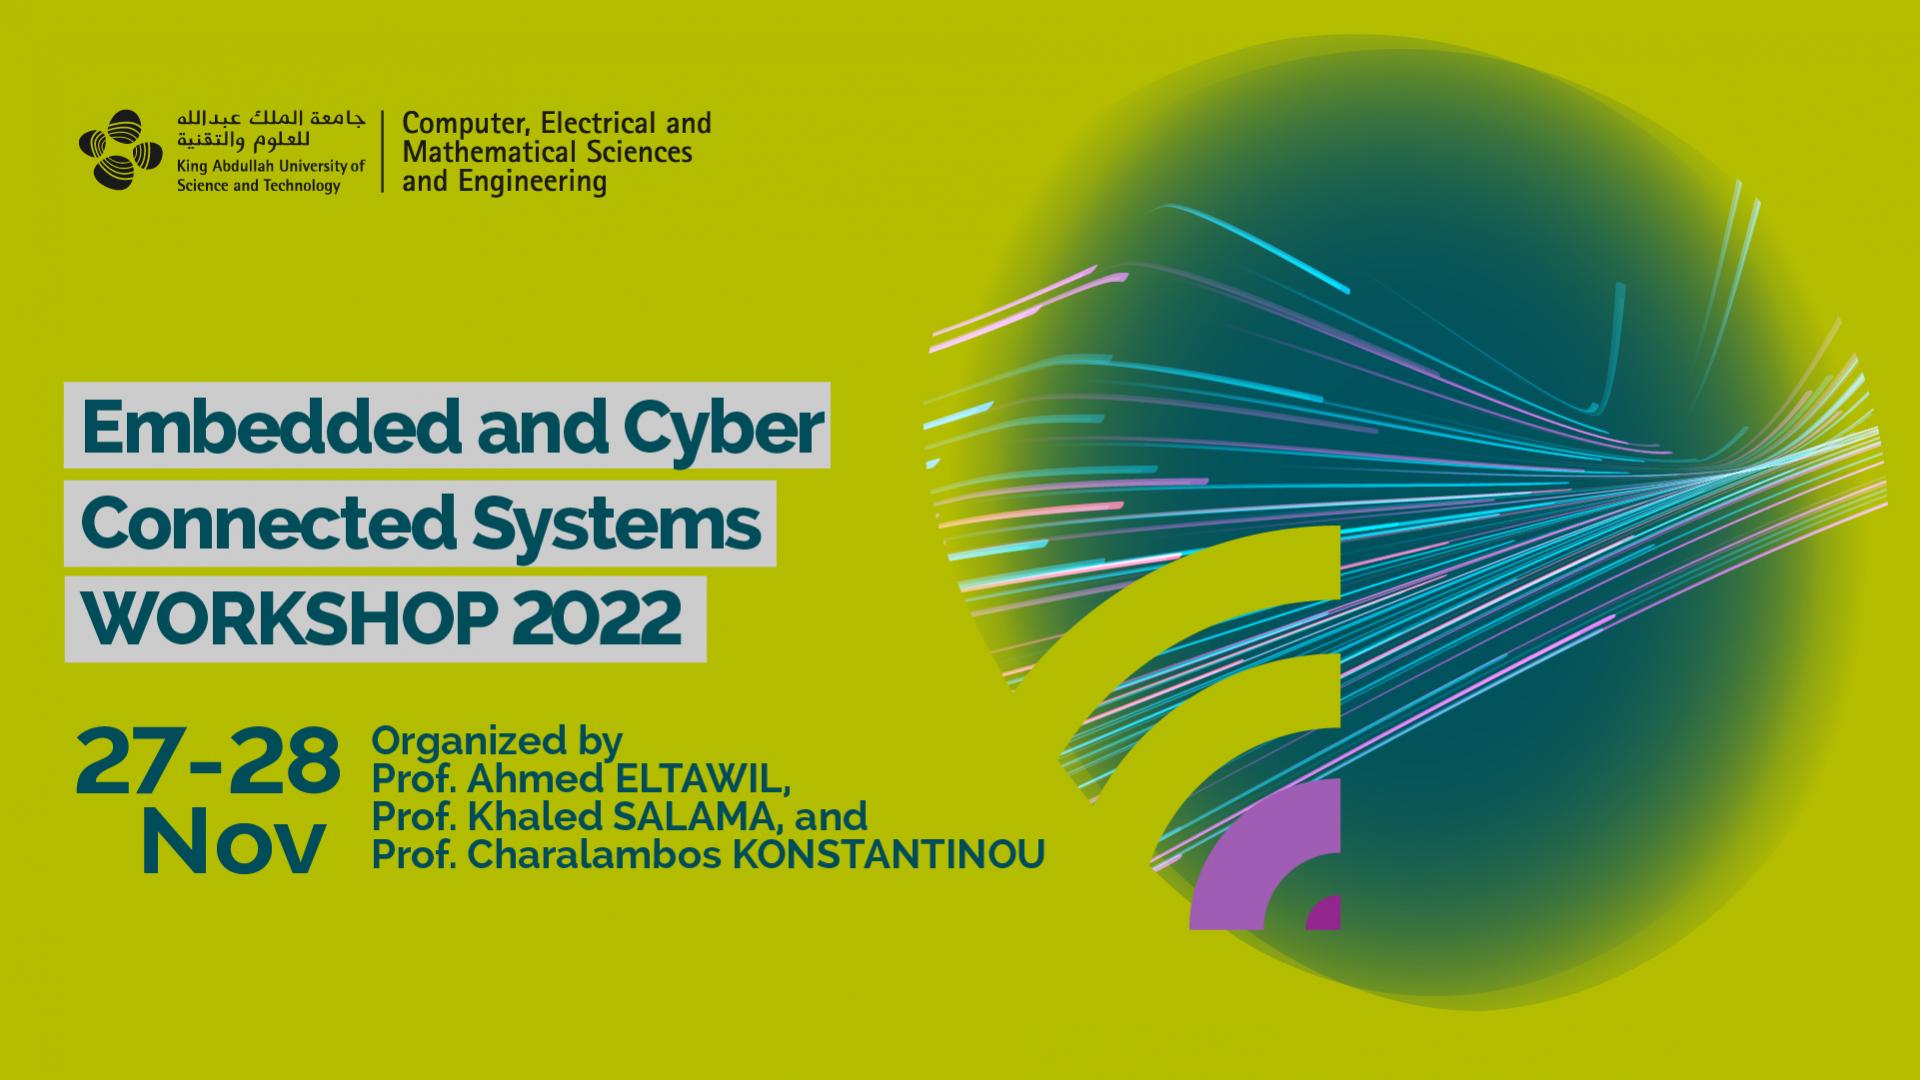 ECCS Workshop 2022 KAUST and email announcements